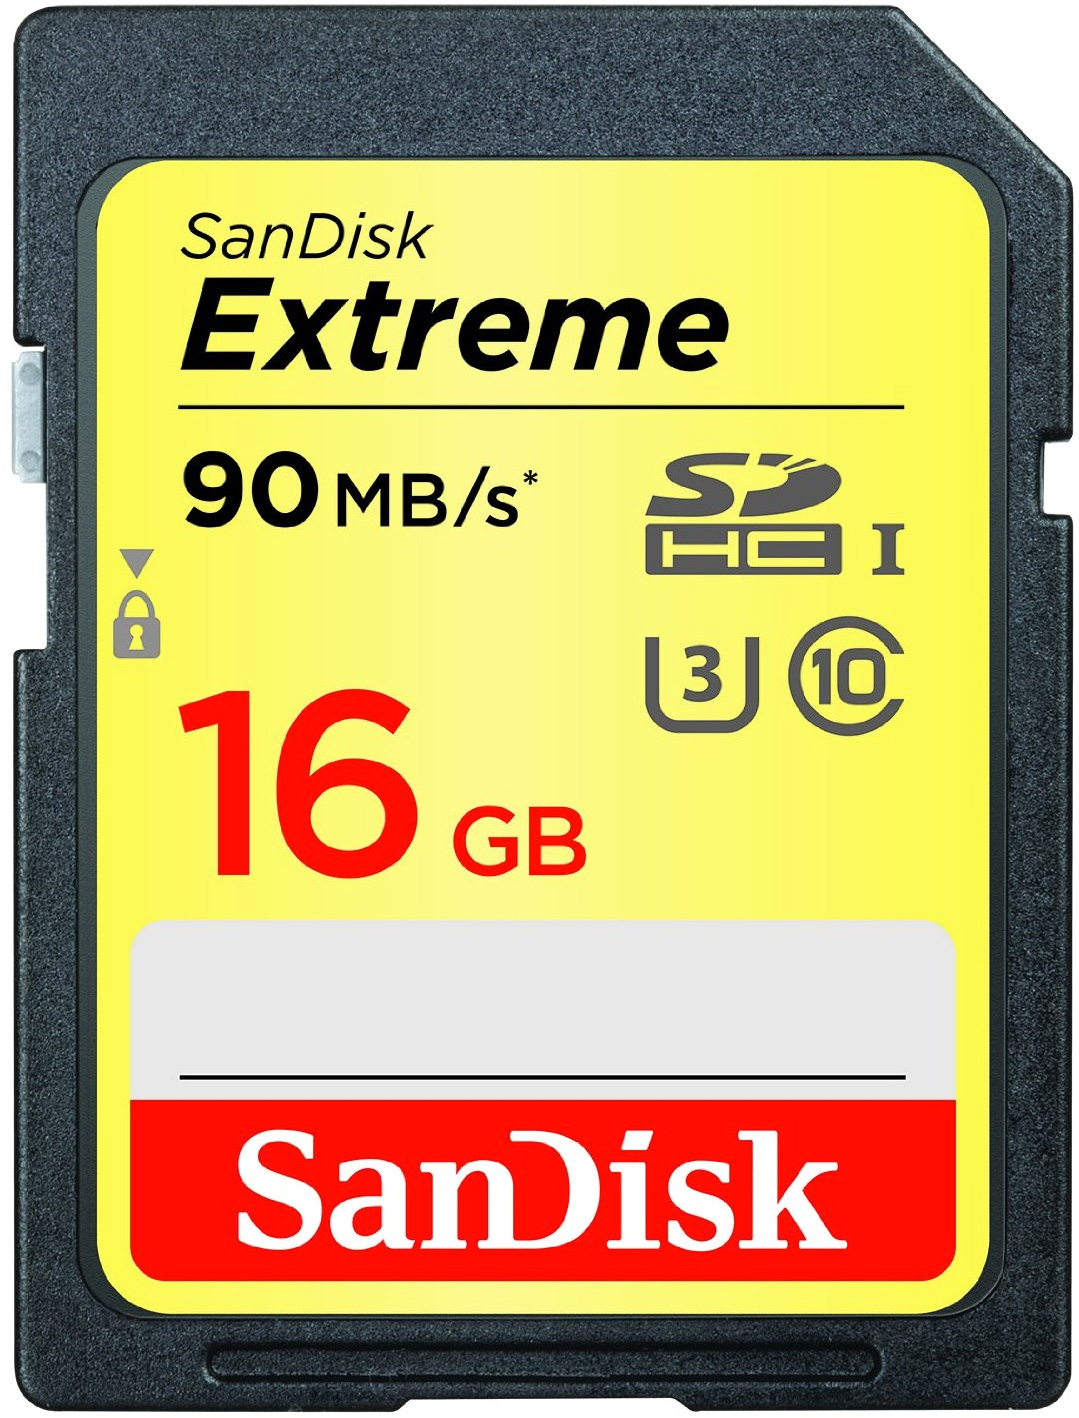 SanDisk Extreme SDHC Class 10 16GB SDSDXNE-016G-GNCIN карта памяти 32gb sandisk extreme pro sdhc class 10 uhs ii u3 sdsdxdk 032g gn4in